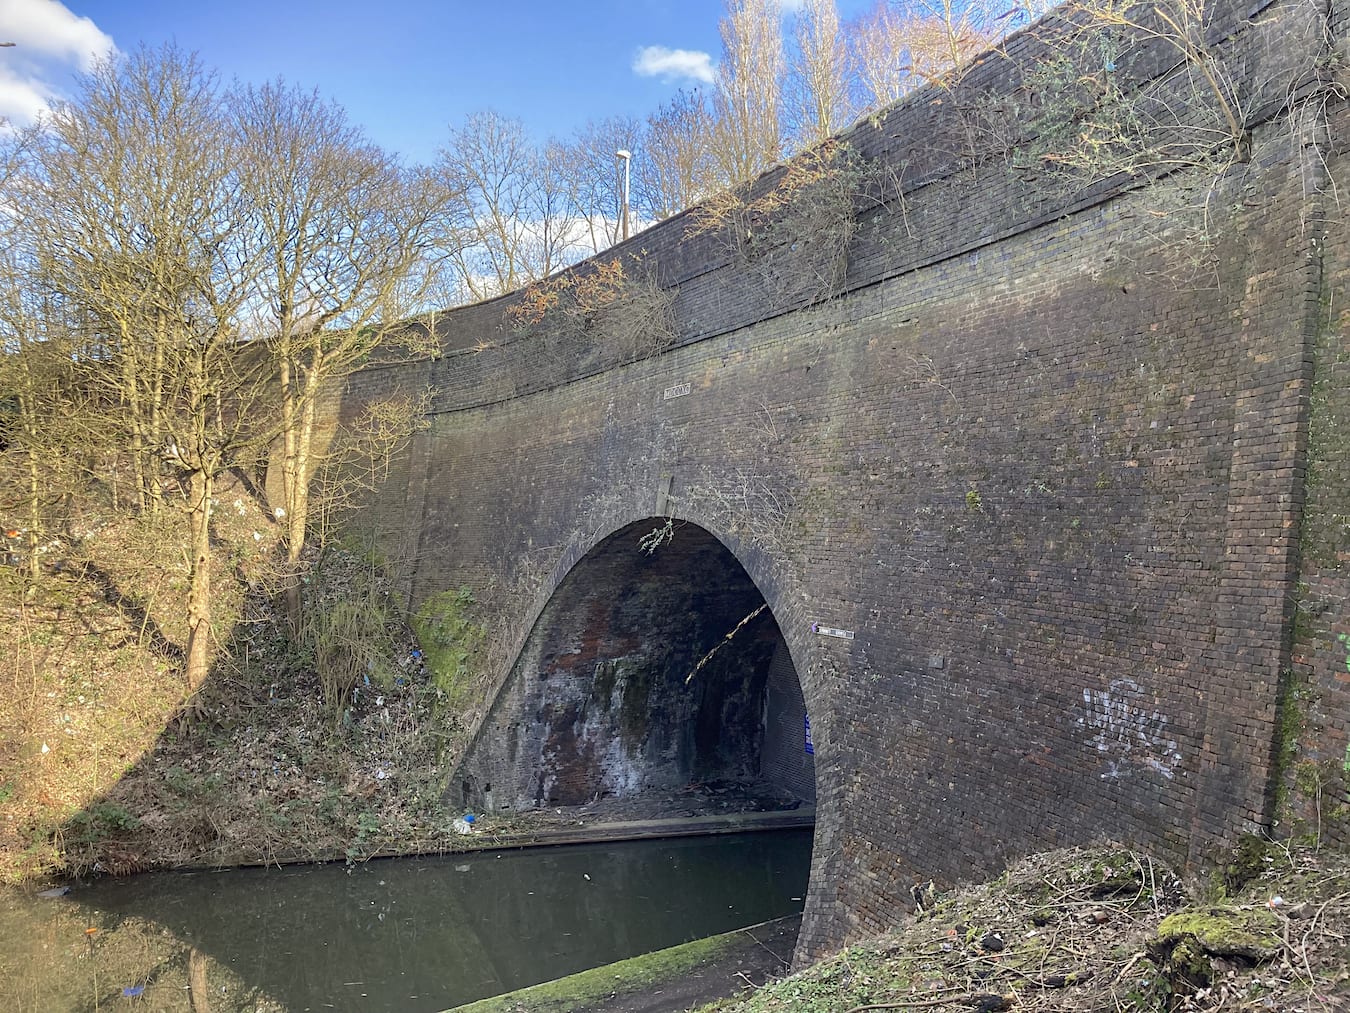 Summit Bridge crossing the BCN Old Main Line canal at Smethwick